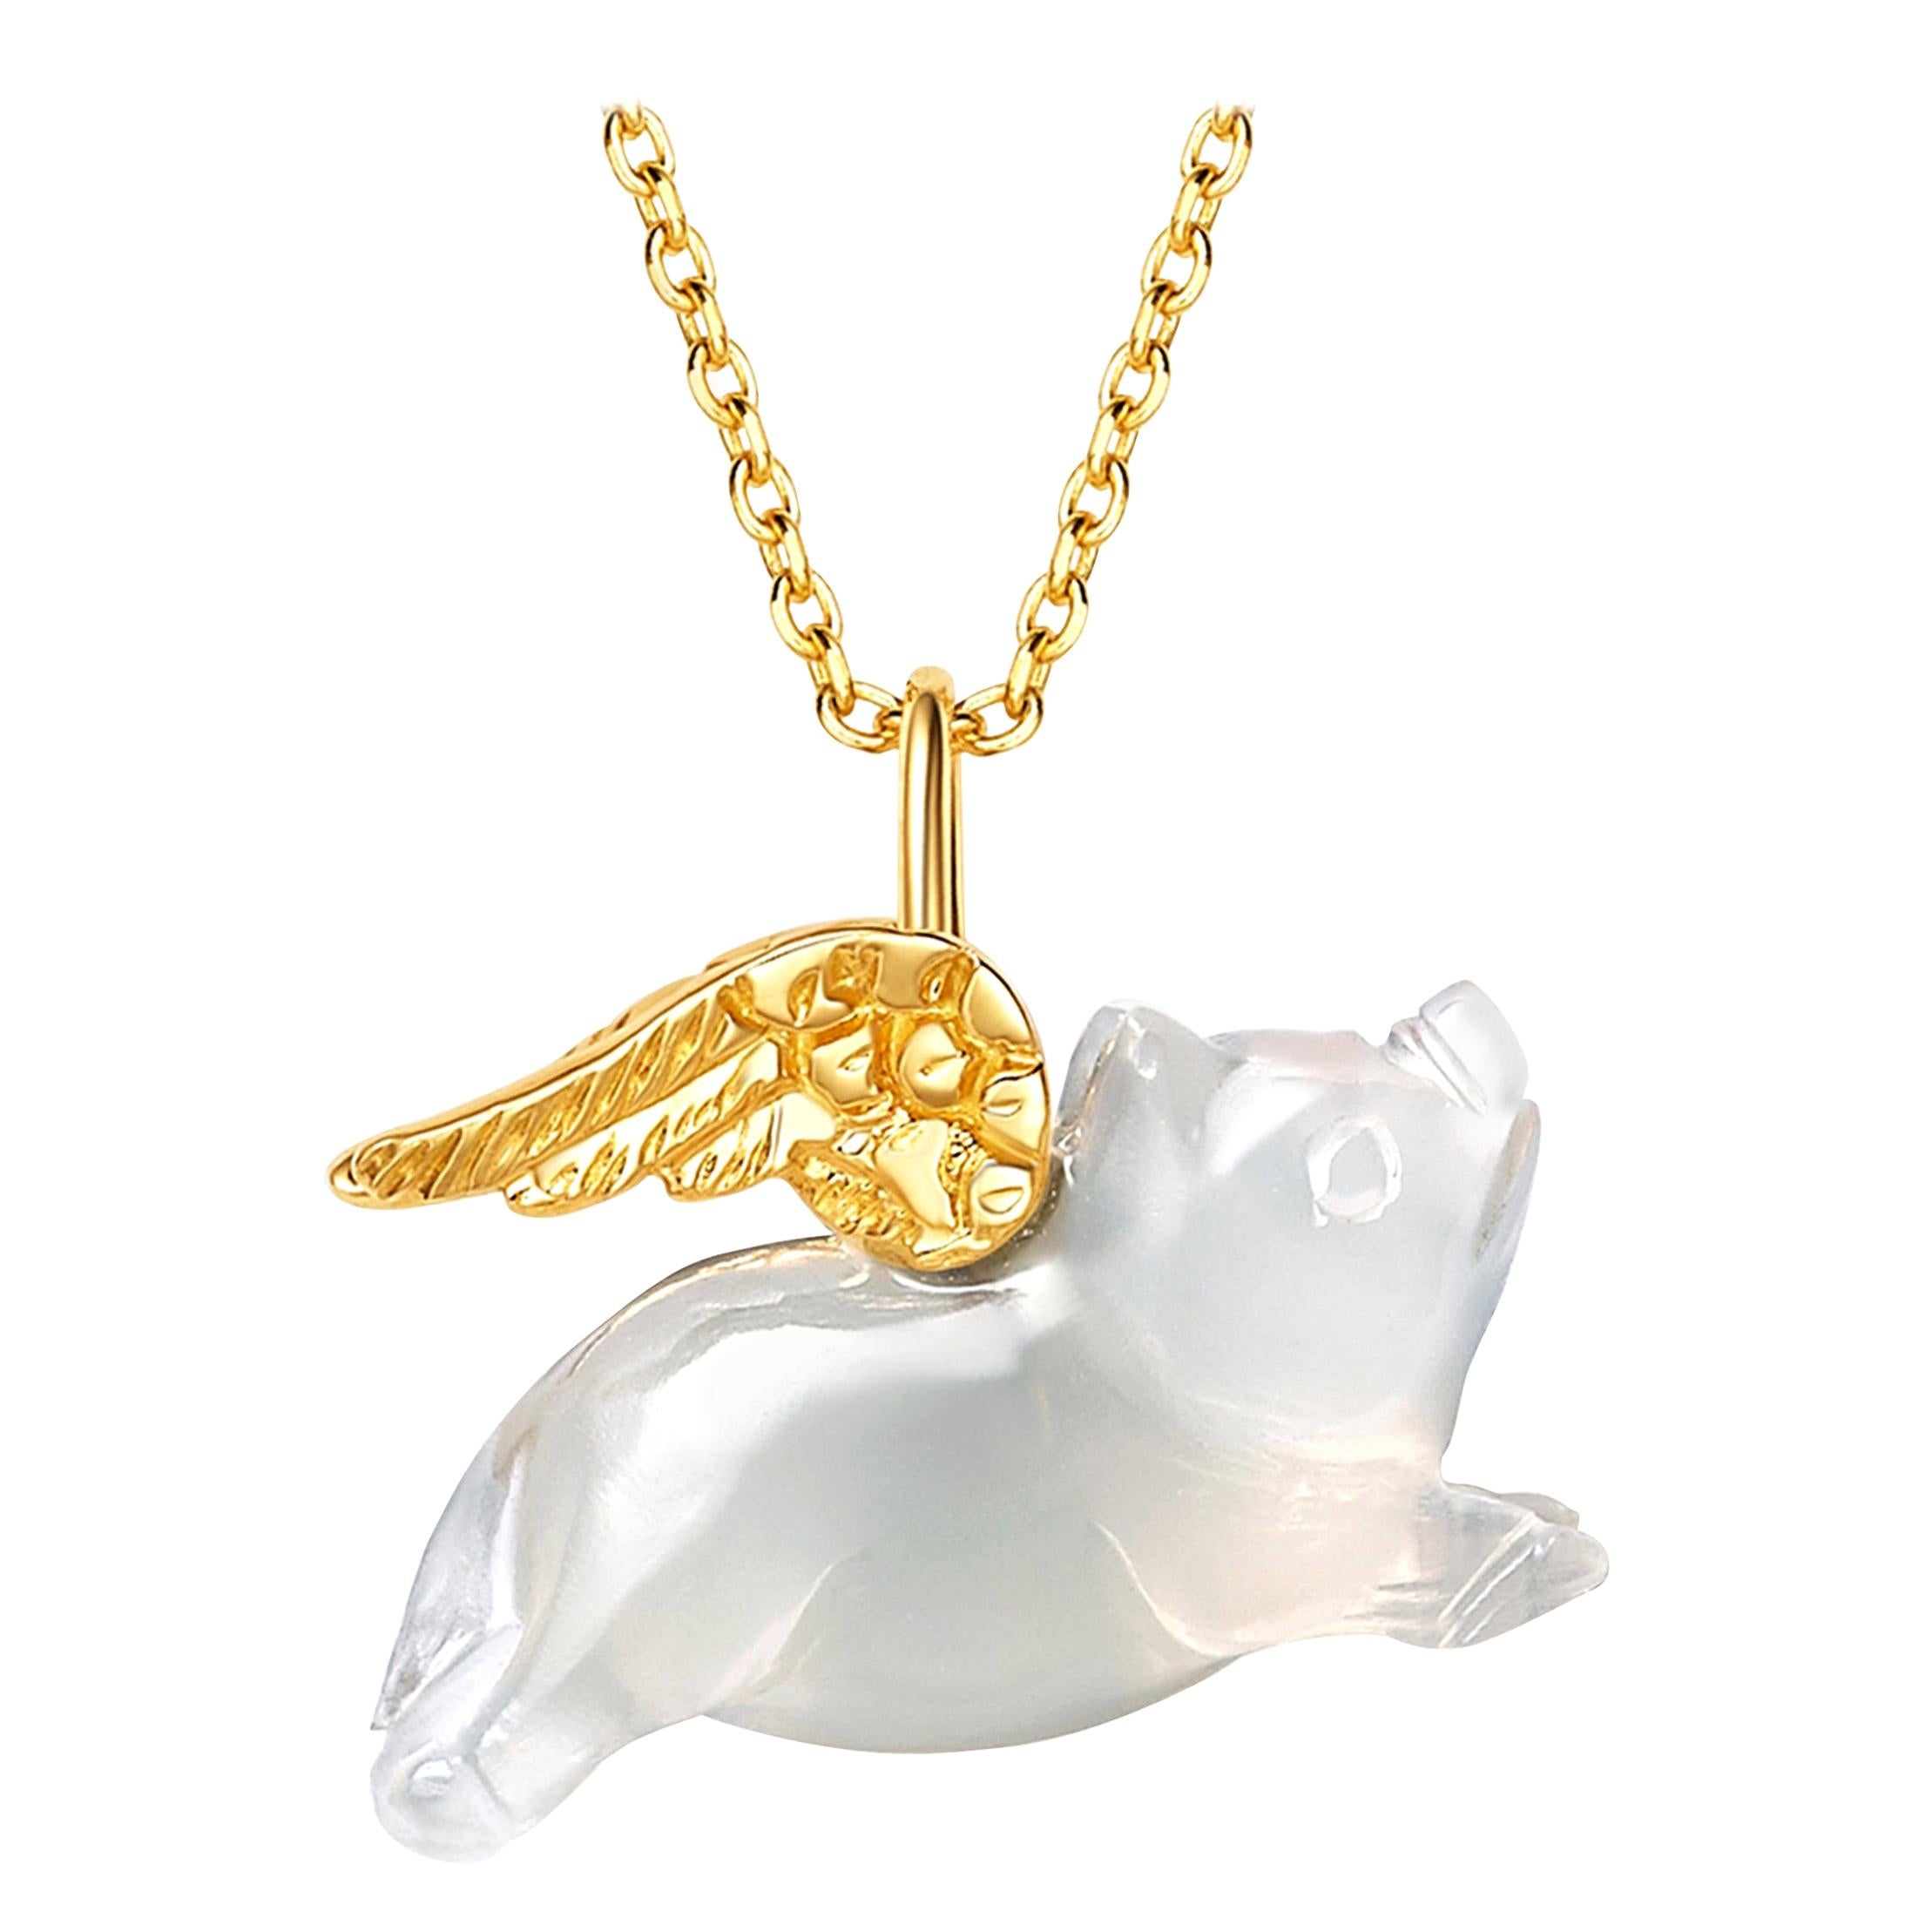 Fei Liu Chalcedony Pig Yellow Gold Wings Necklace Bracelet